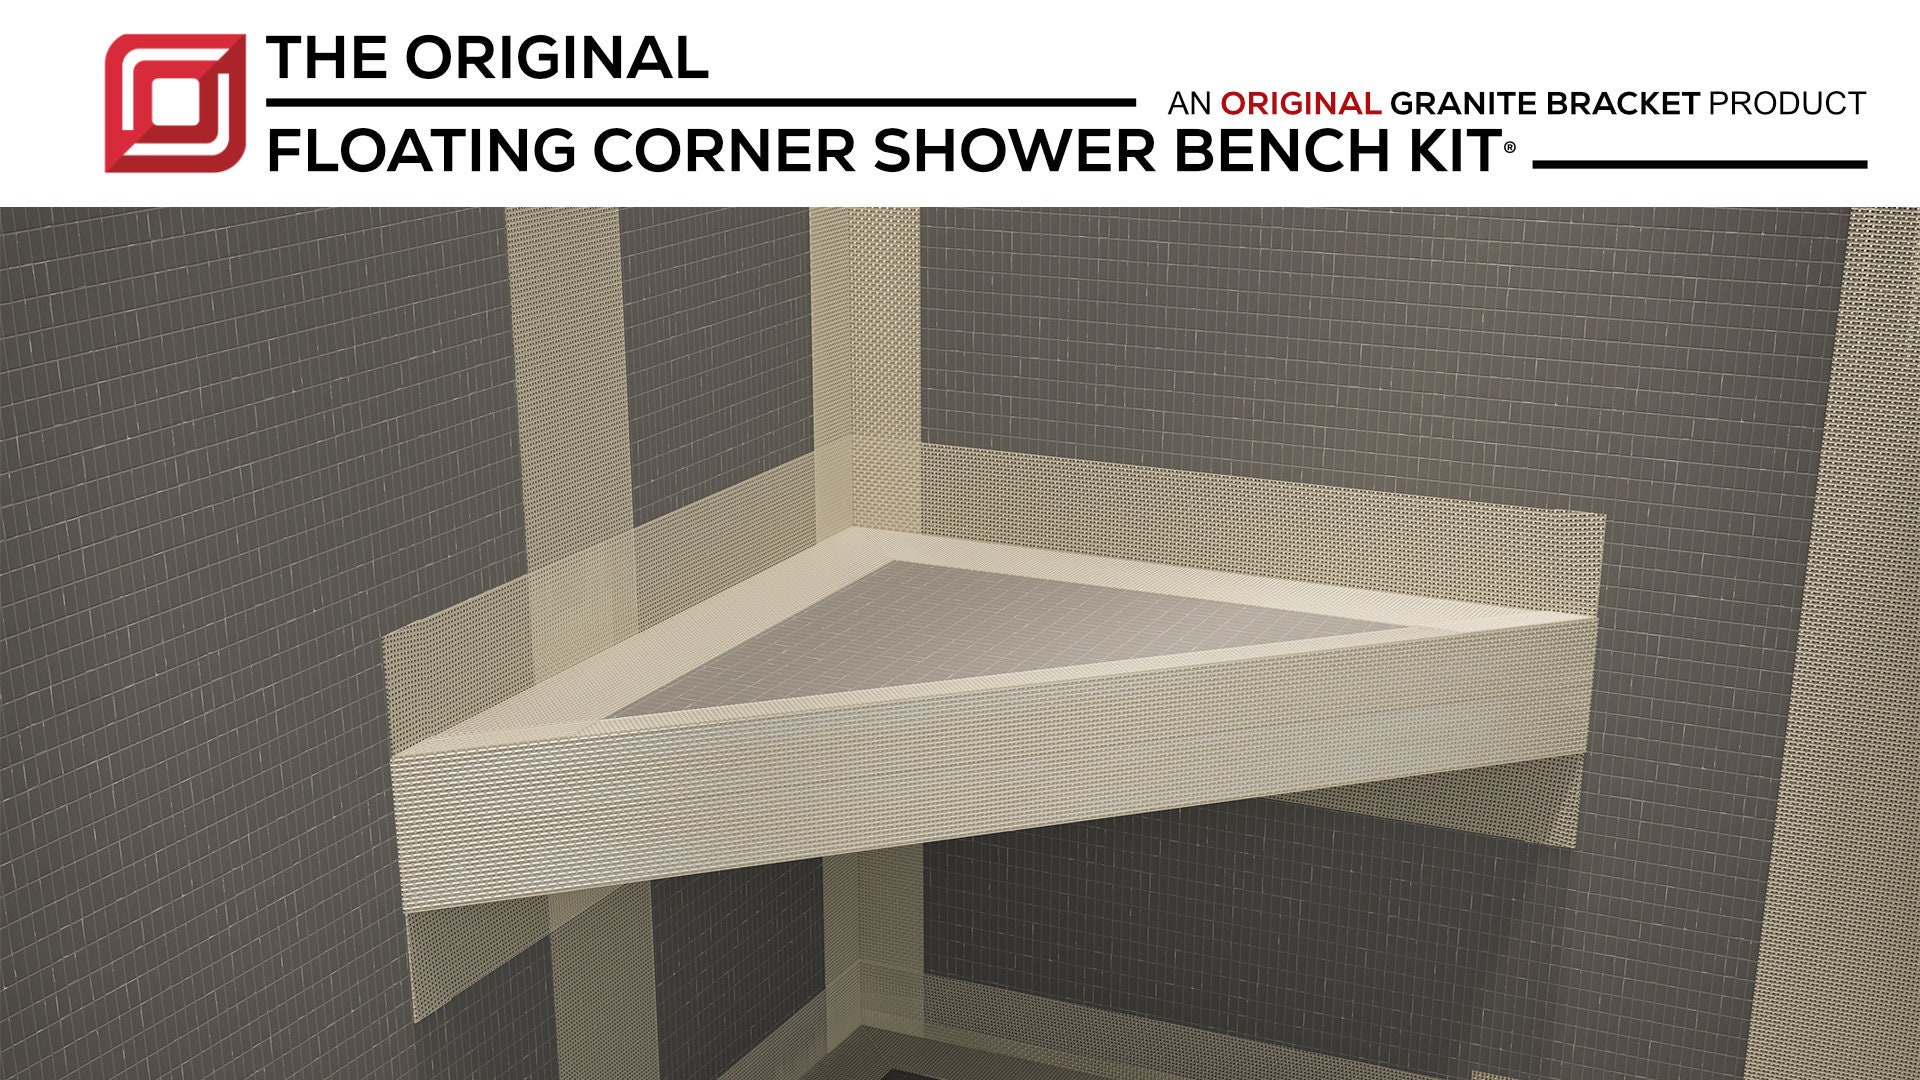 New* The Original Floating Corner Shower Bench Kit® with GoBoard